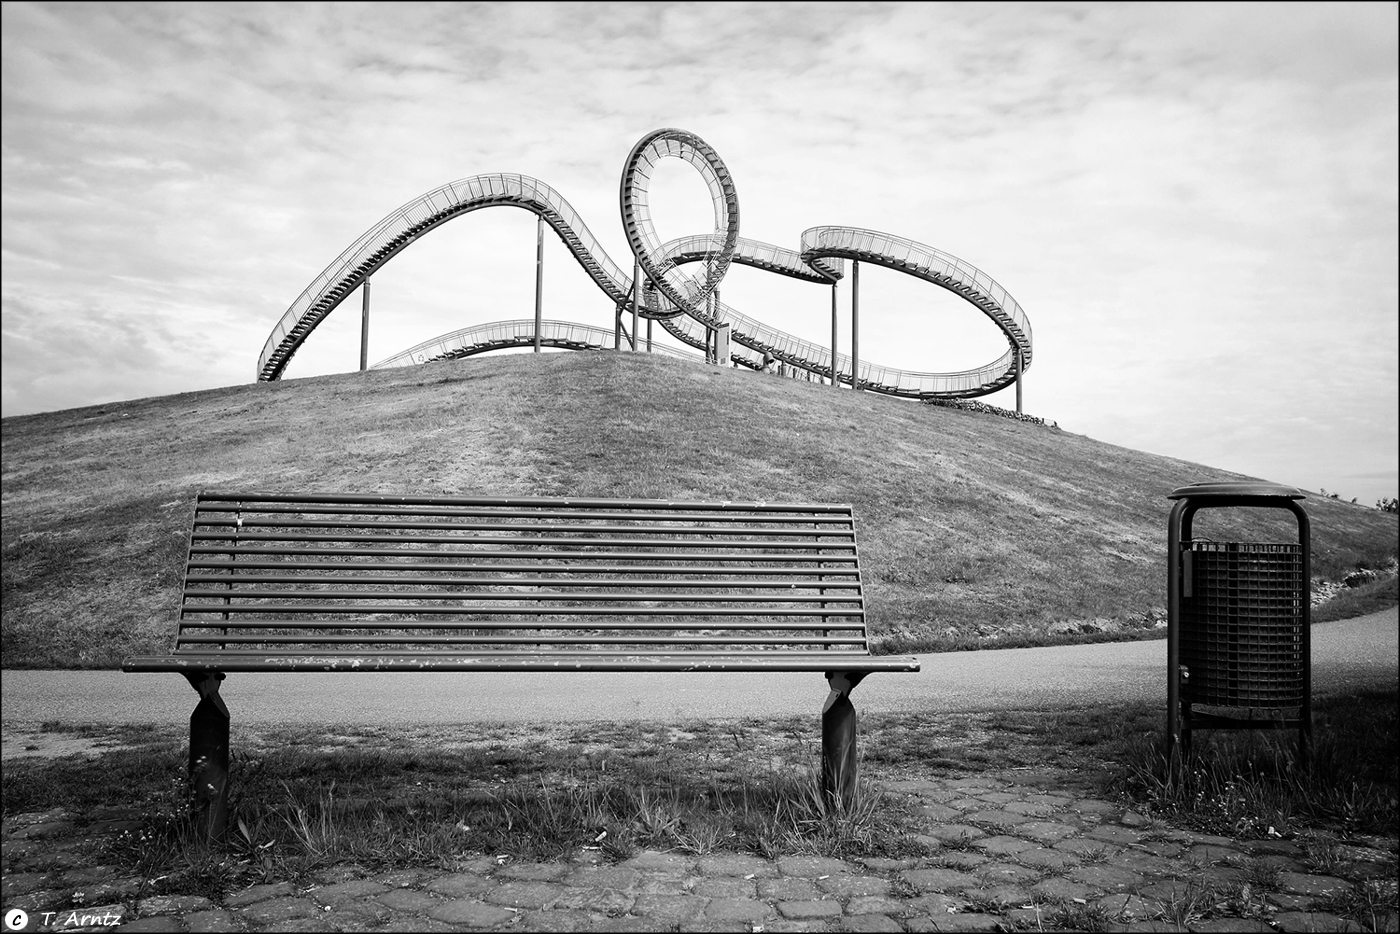 tiger and turtle 